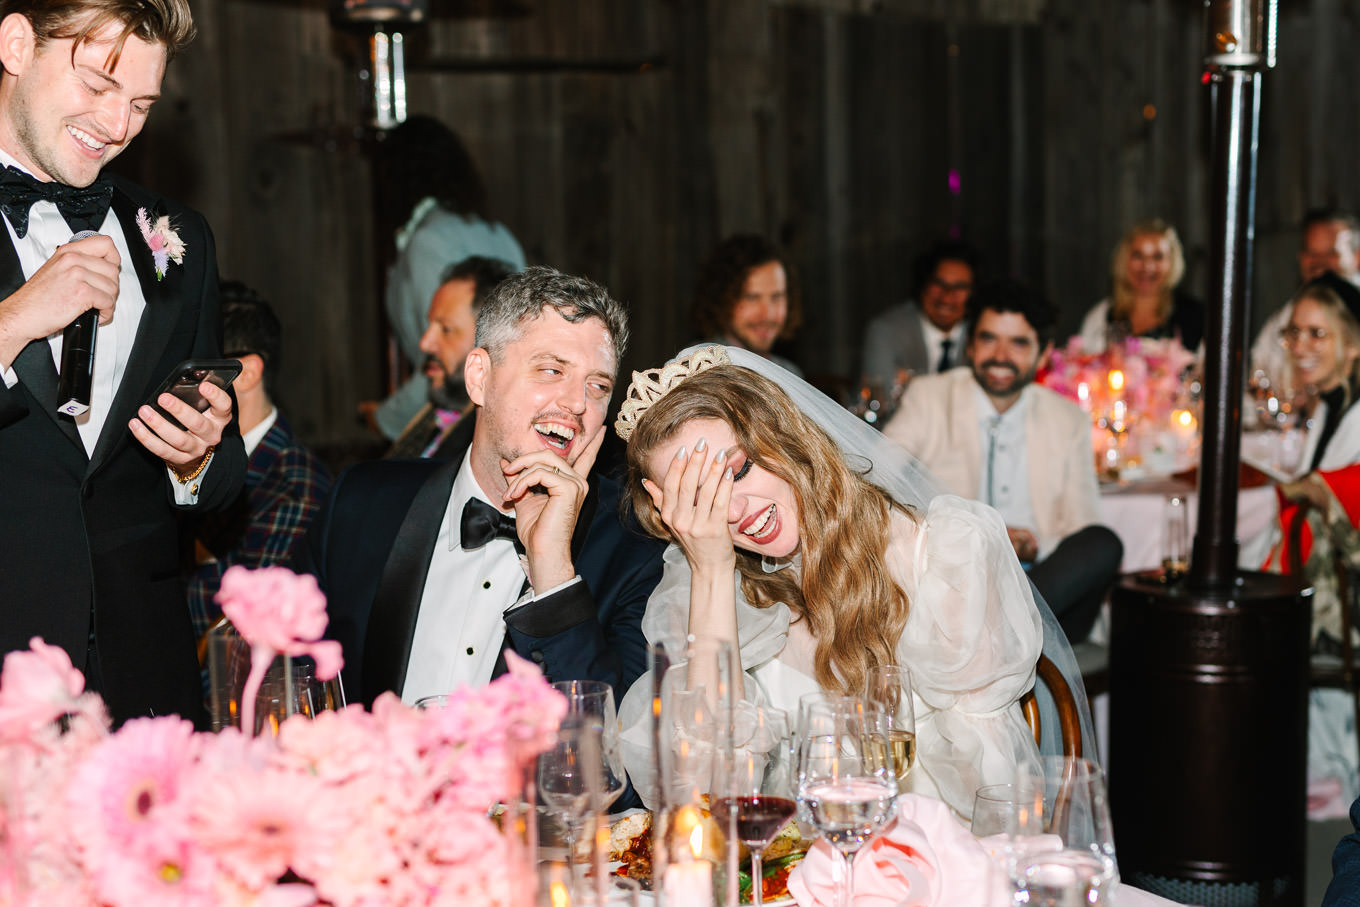 Bride and groom laughing at wedding Monochromatic pastel wedding tables | Colorful and quirky wedding at Higuera Ranch in San Luis Obispo | #sanluisobispowedding #californiawedding #higueraranch #madonnainn   Source: Mary Costa Photography | Los Angeles